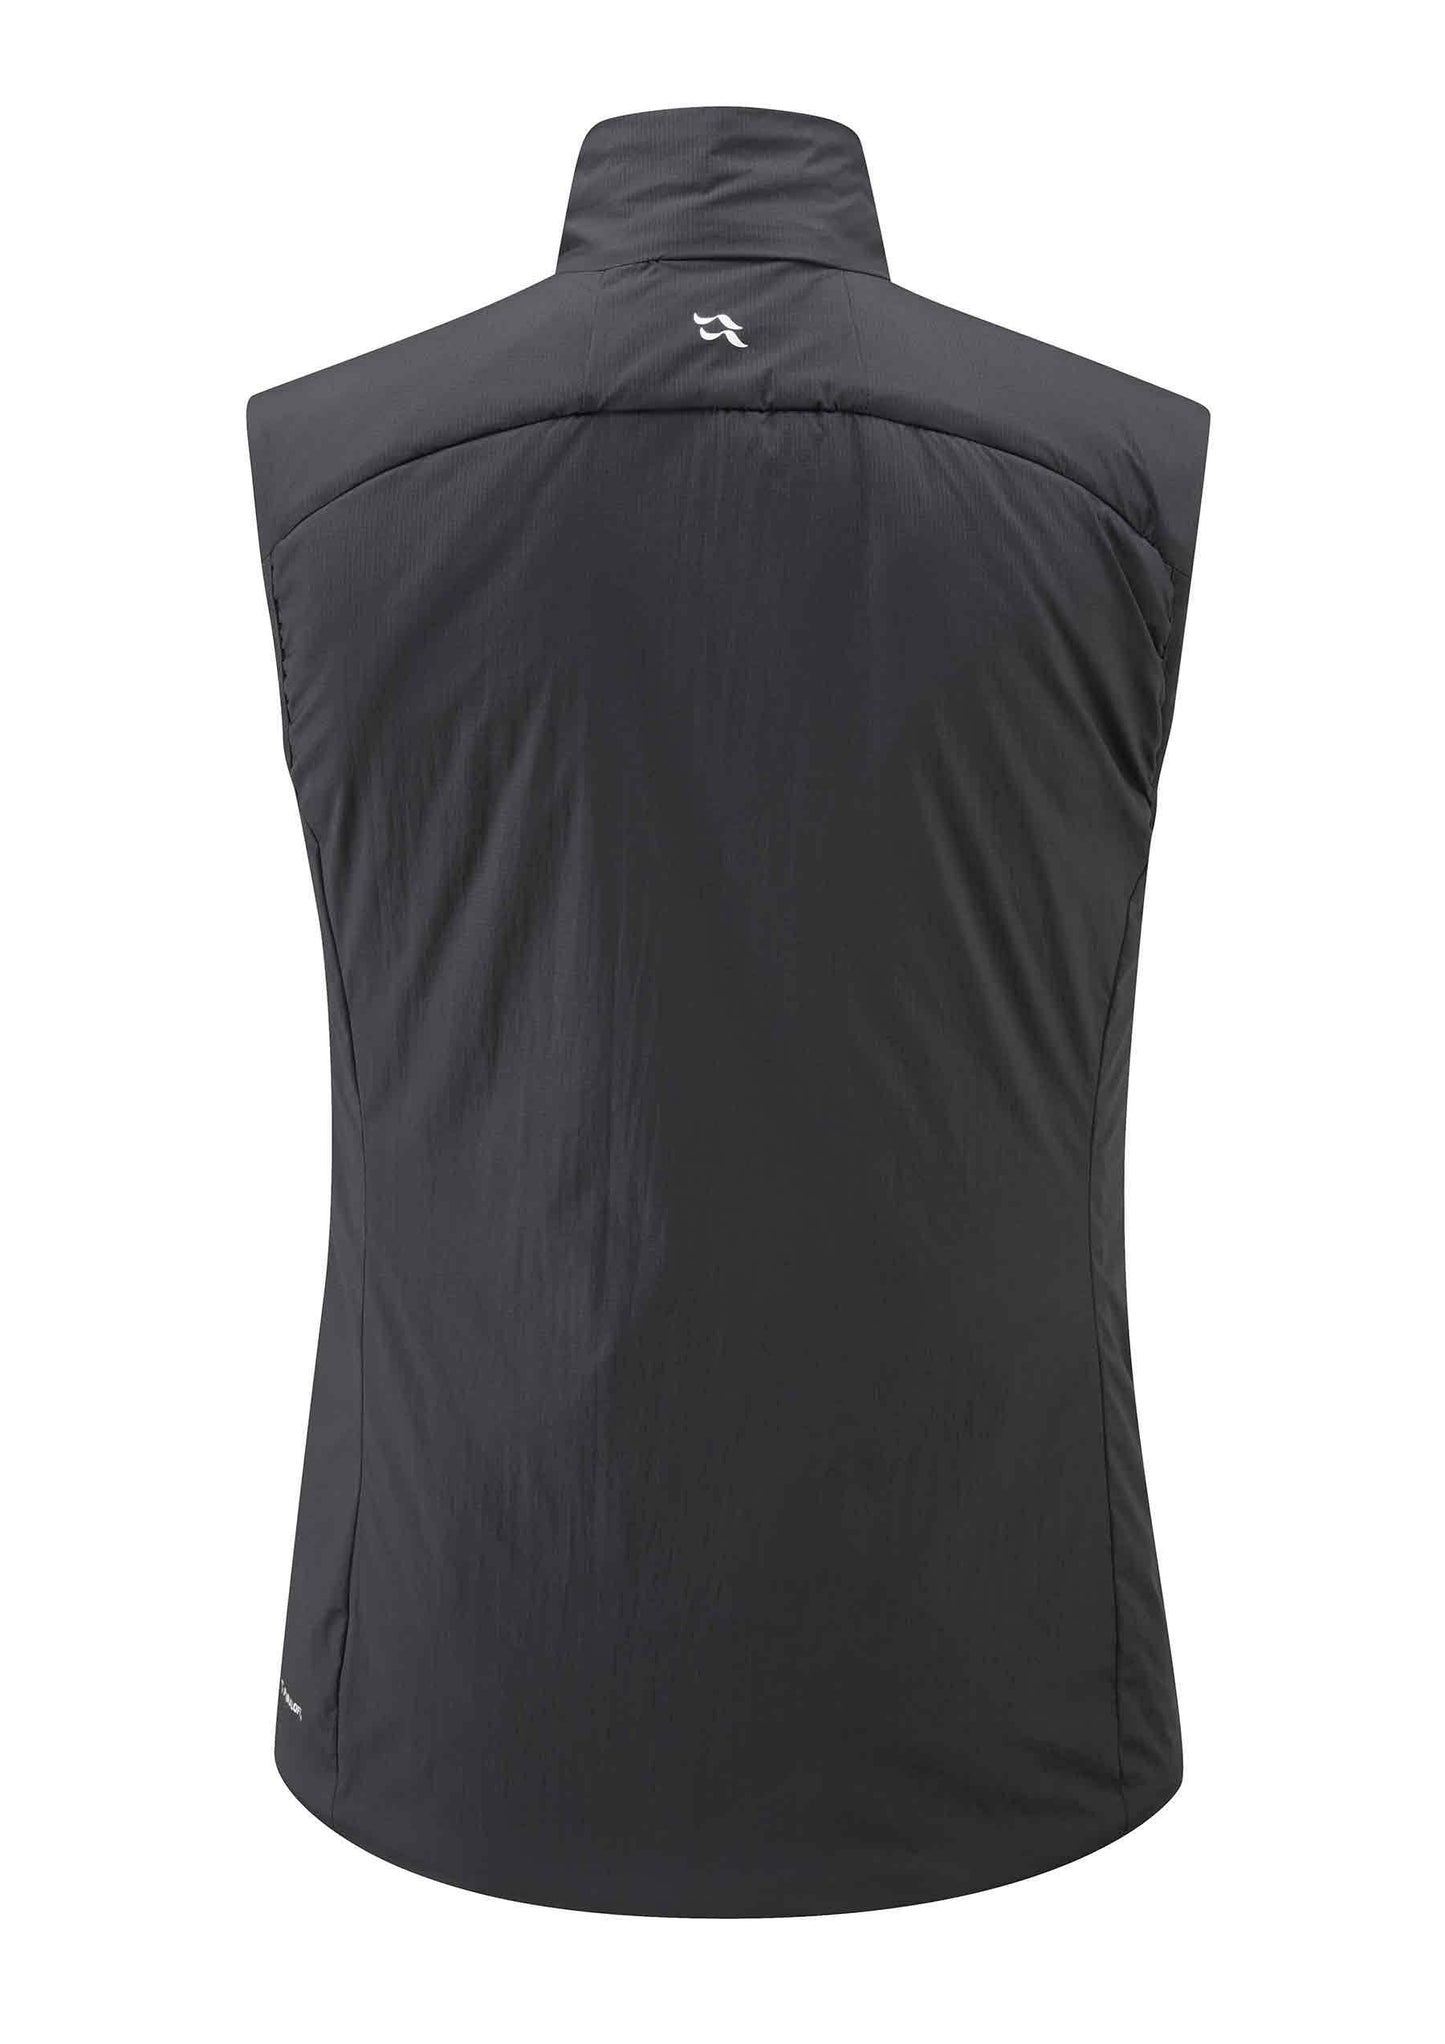 Women’s Xenair Vest by RAB - The Luxury Promotional Gifts Company Limited